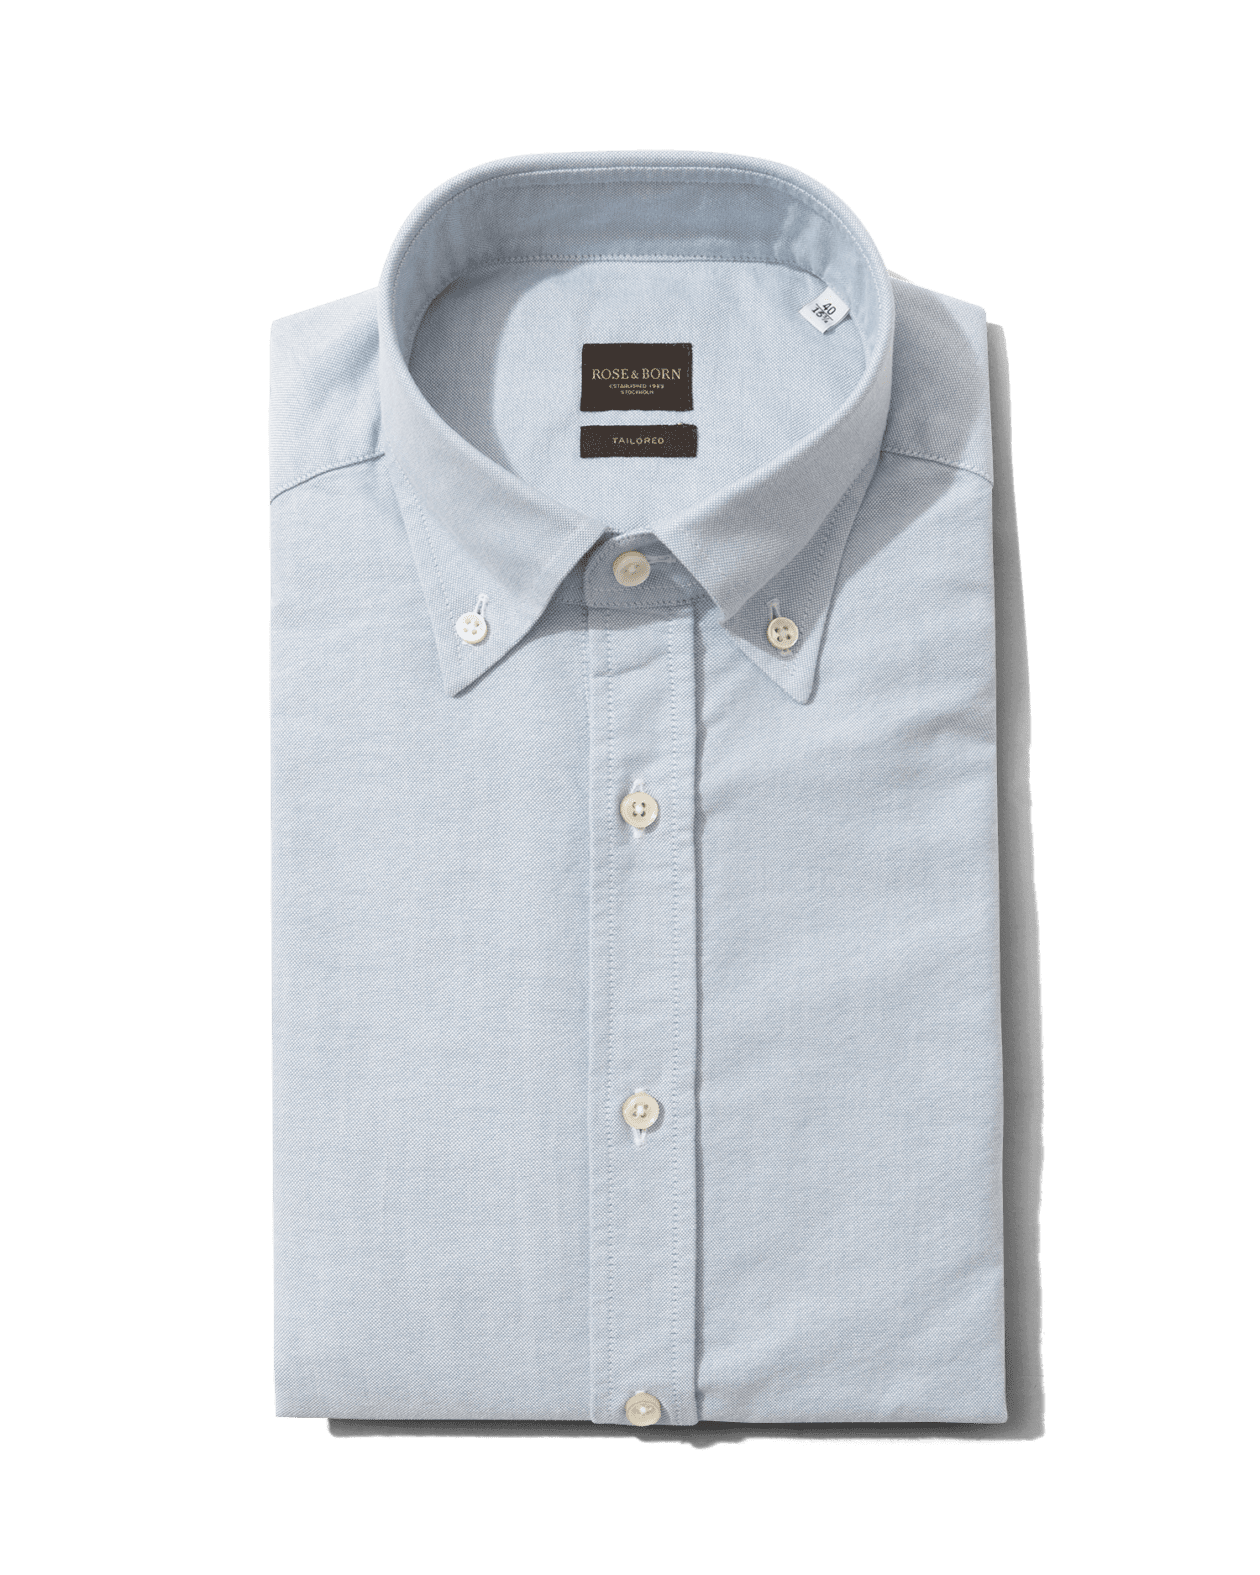 Blue Washed Oxford Button-Down Shirt